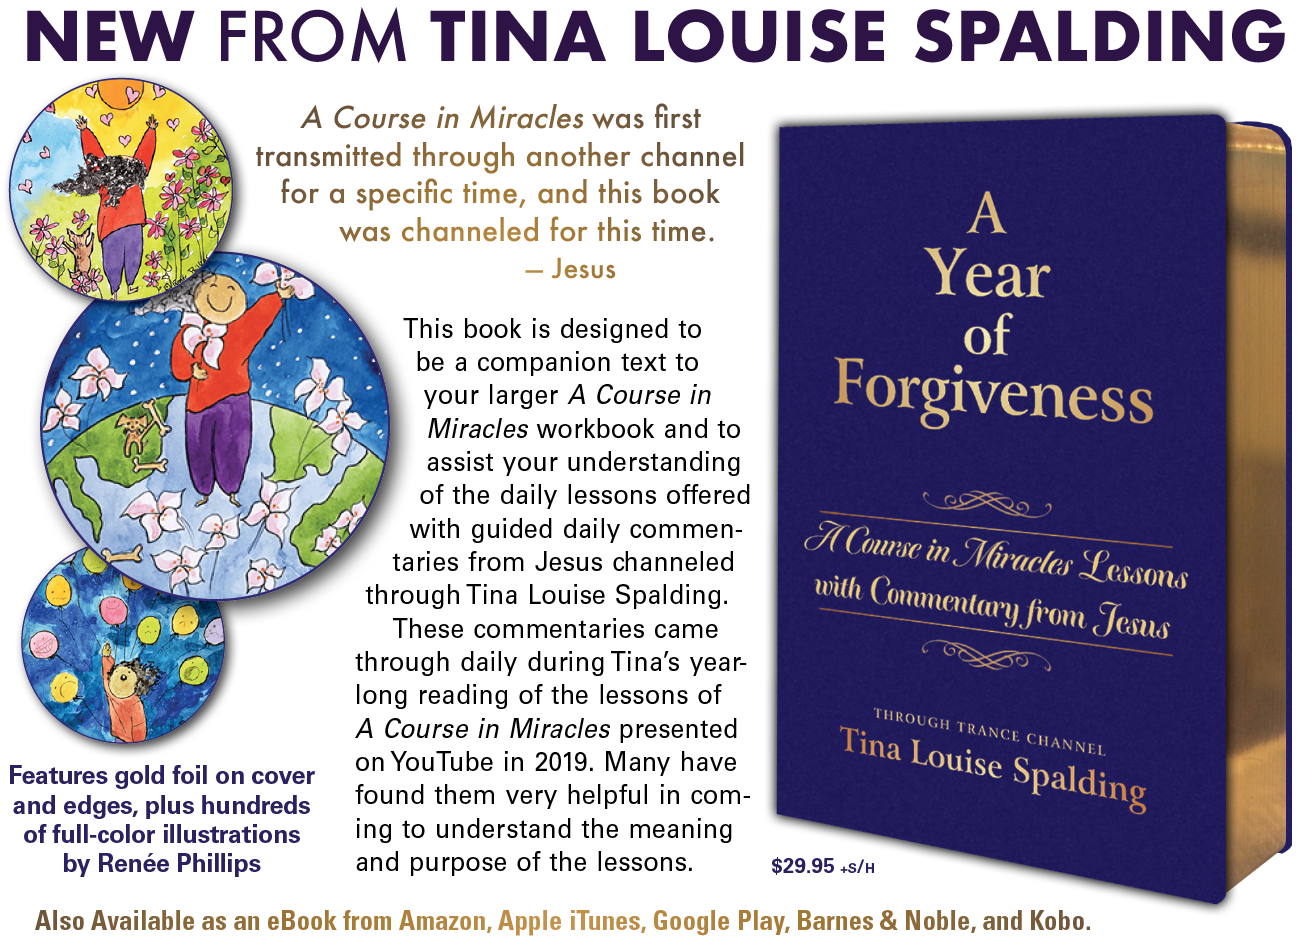 New from Tina Louise Spalding - A Year of Forgiveness